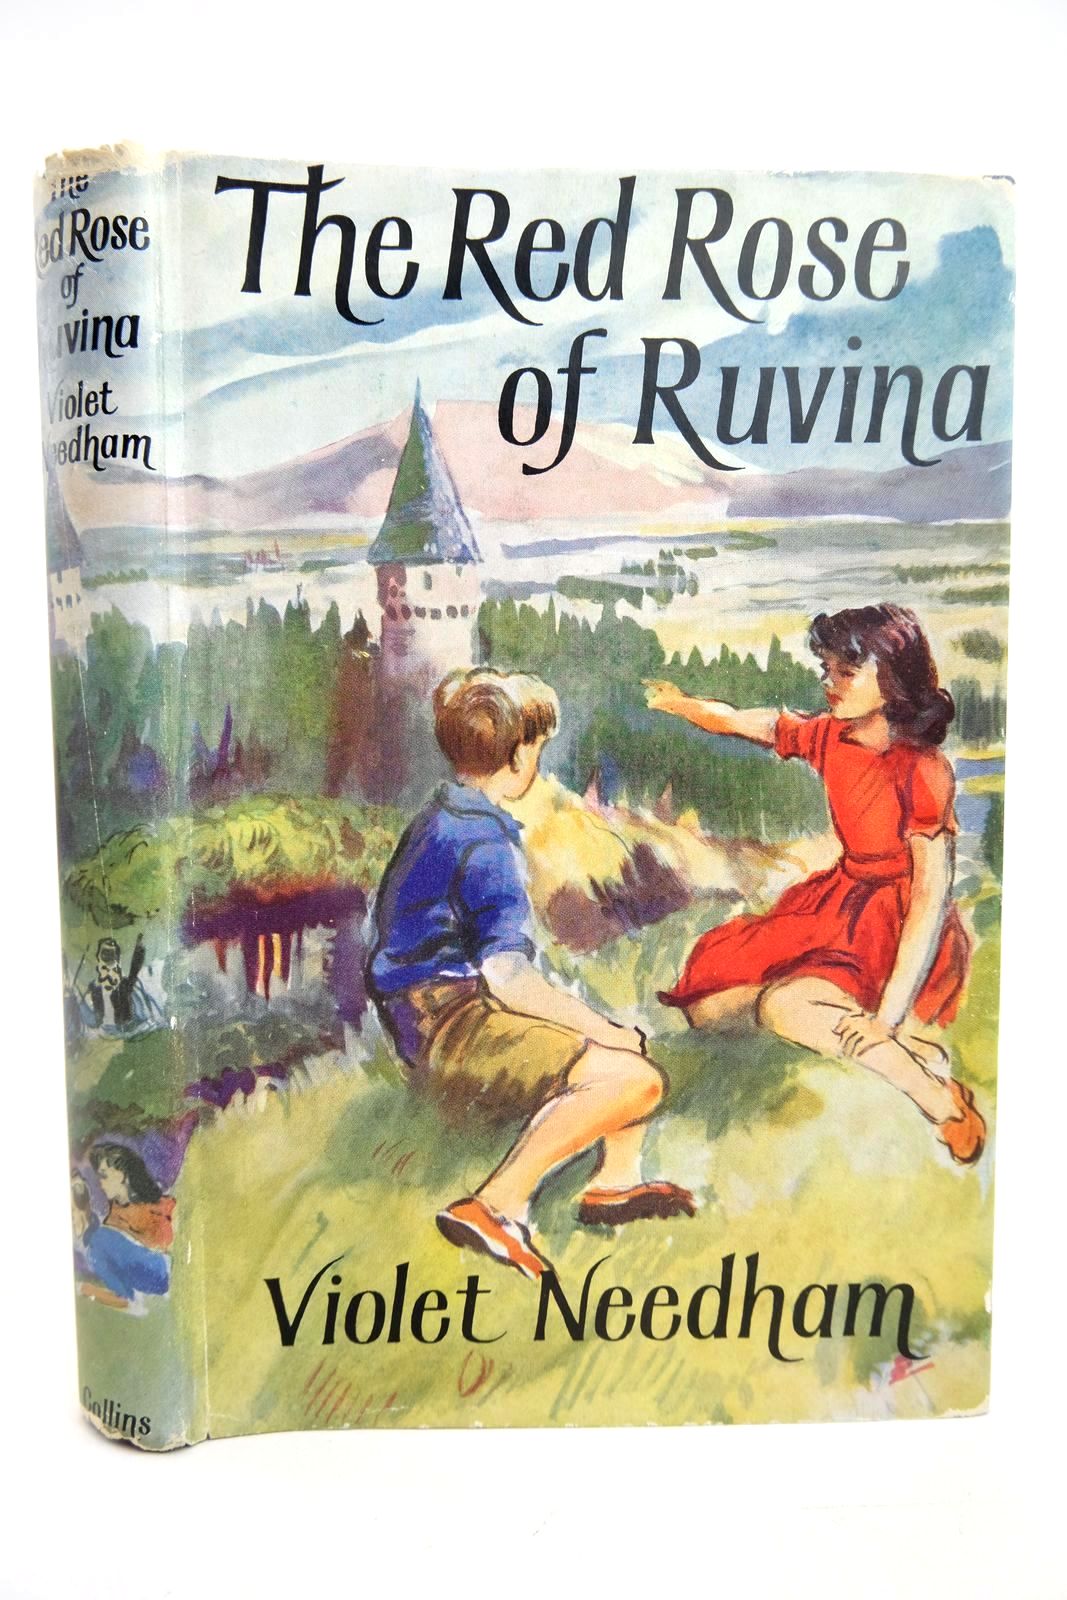 Photo of THE RED ROSE OF RUVINA written by Needham, Violet illustrated by Kennedy, Richard published by Collins (STOCK CODE: 1318778)  for sale by Stella & Rose's Books